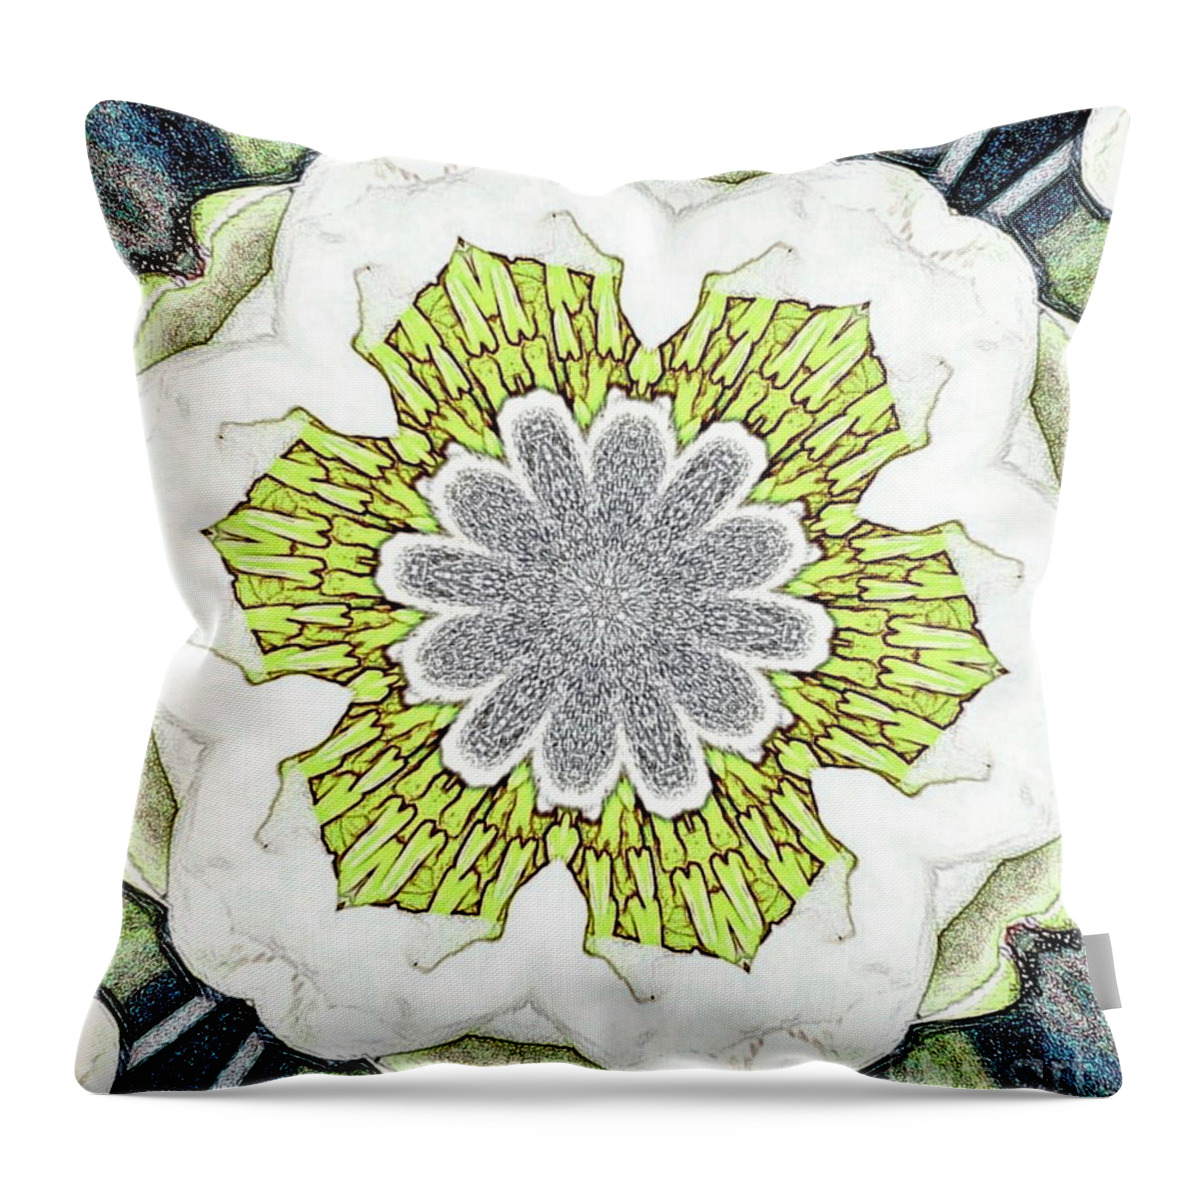 Digital Manipulation Throw Pillow featuring the digital art Botanical Medley by Tracey Lee Cassin